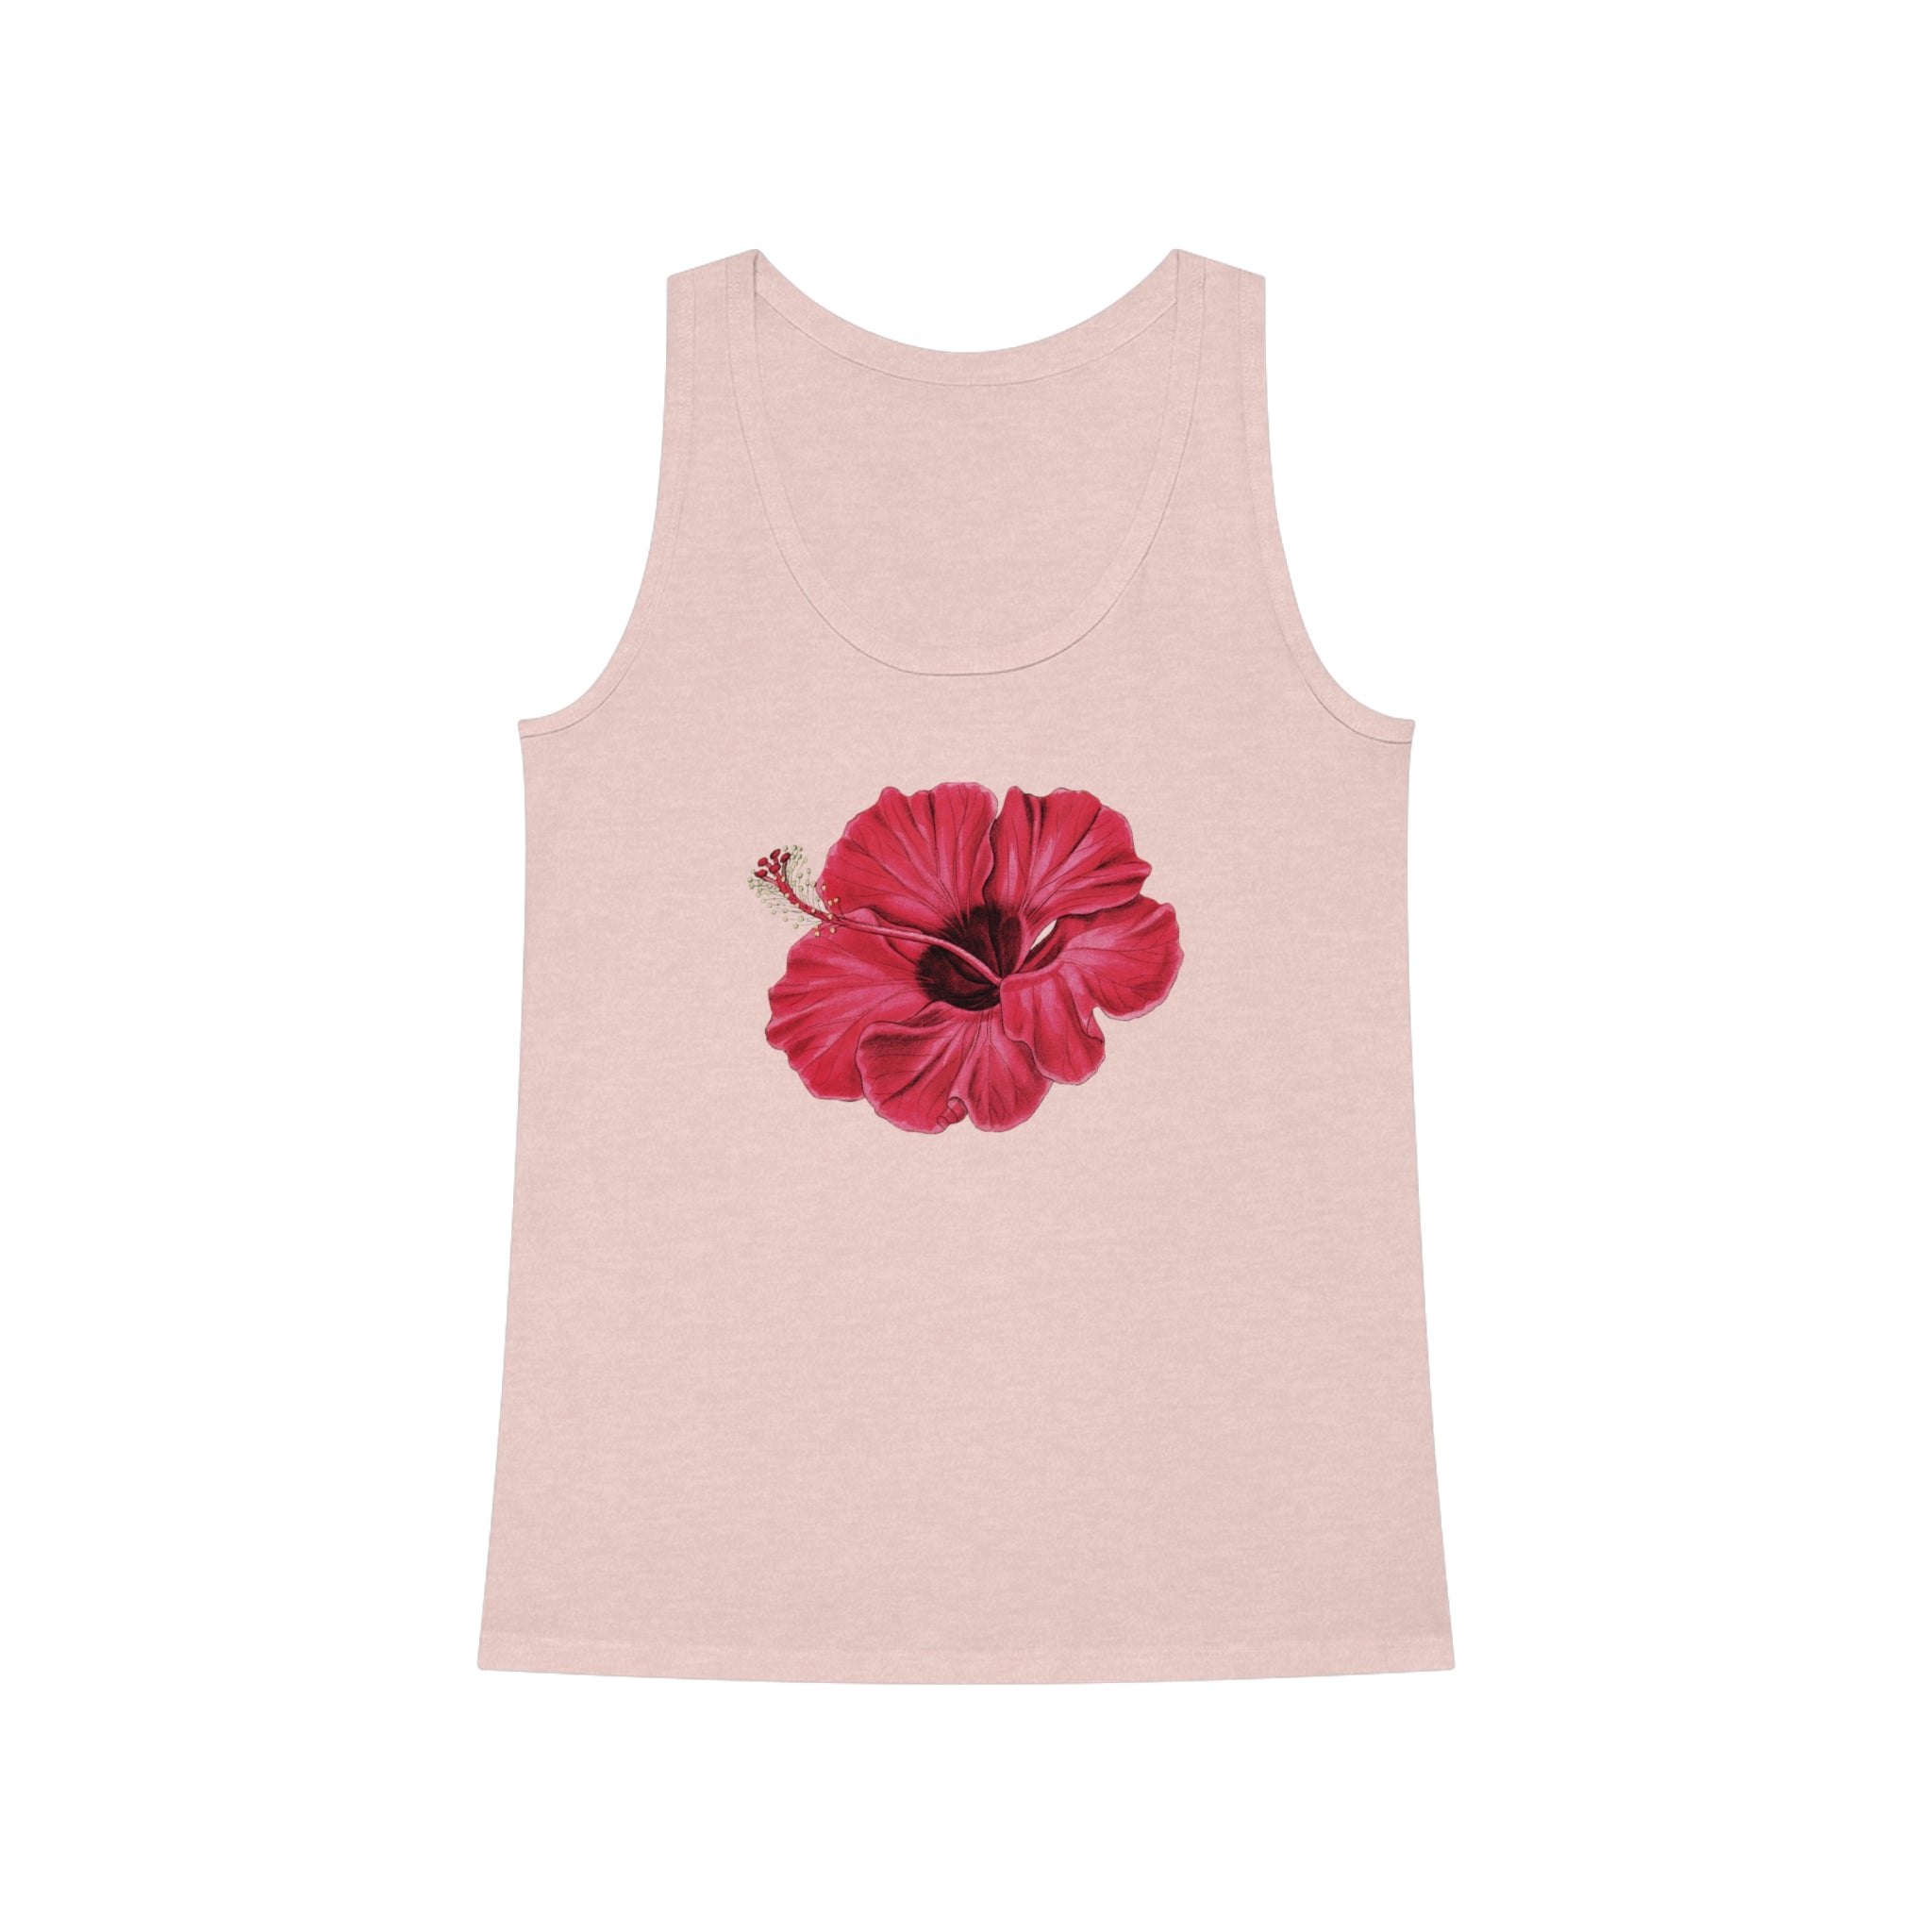 A Flower Red tank top with a hibiscus flower on it.